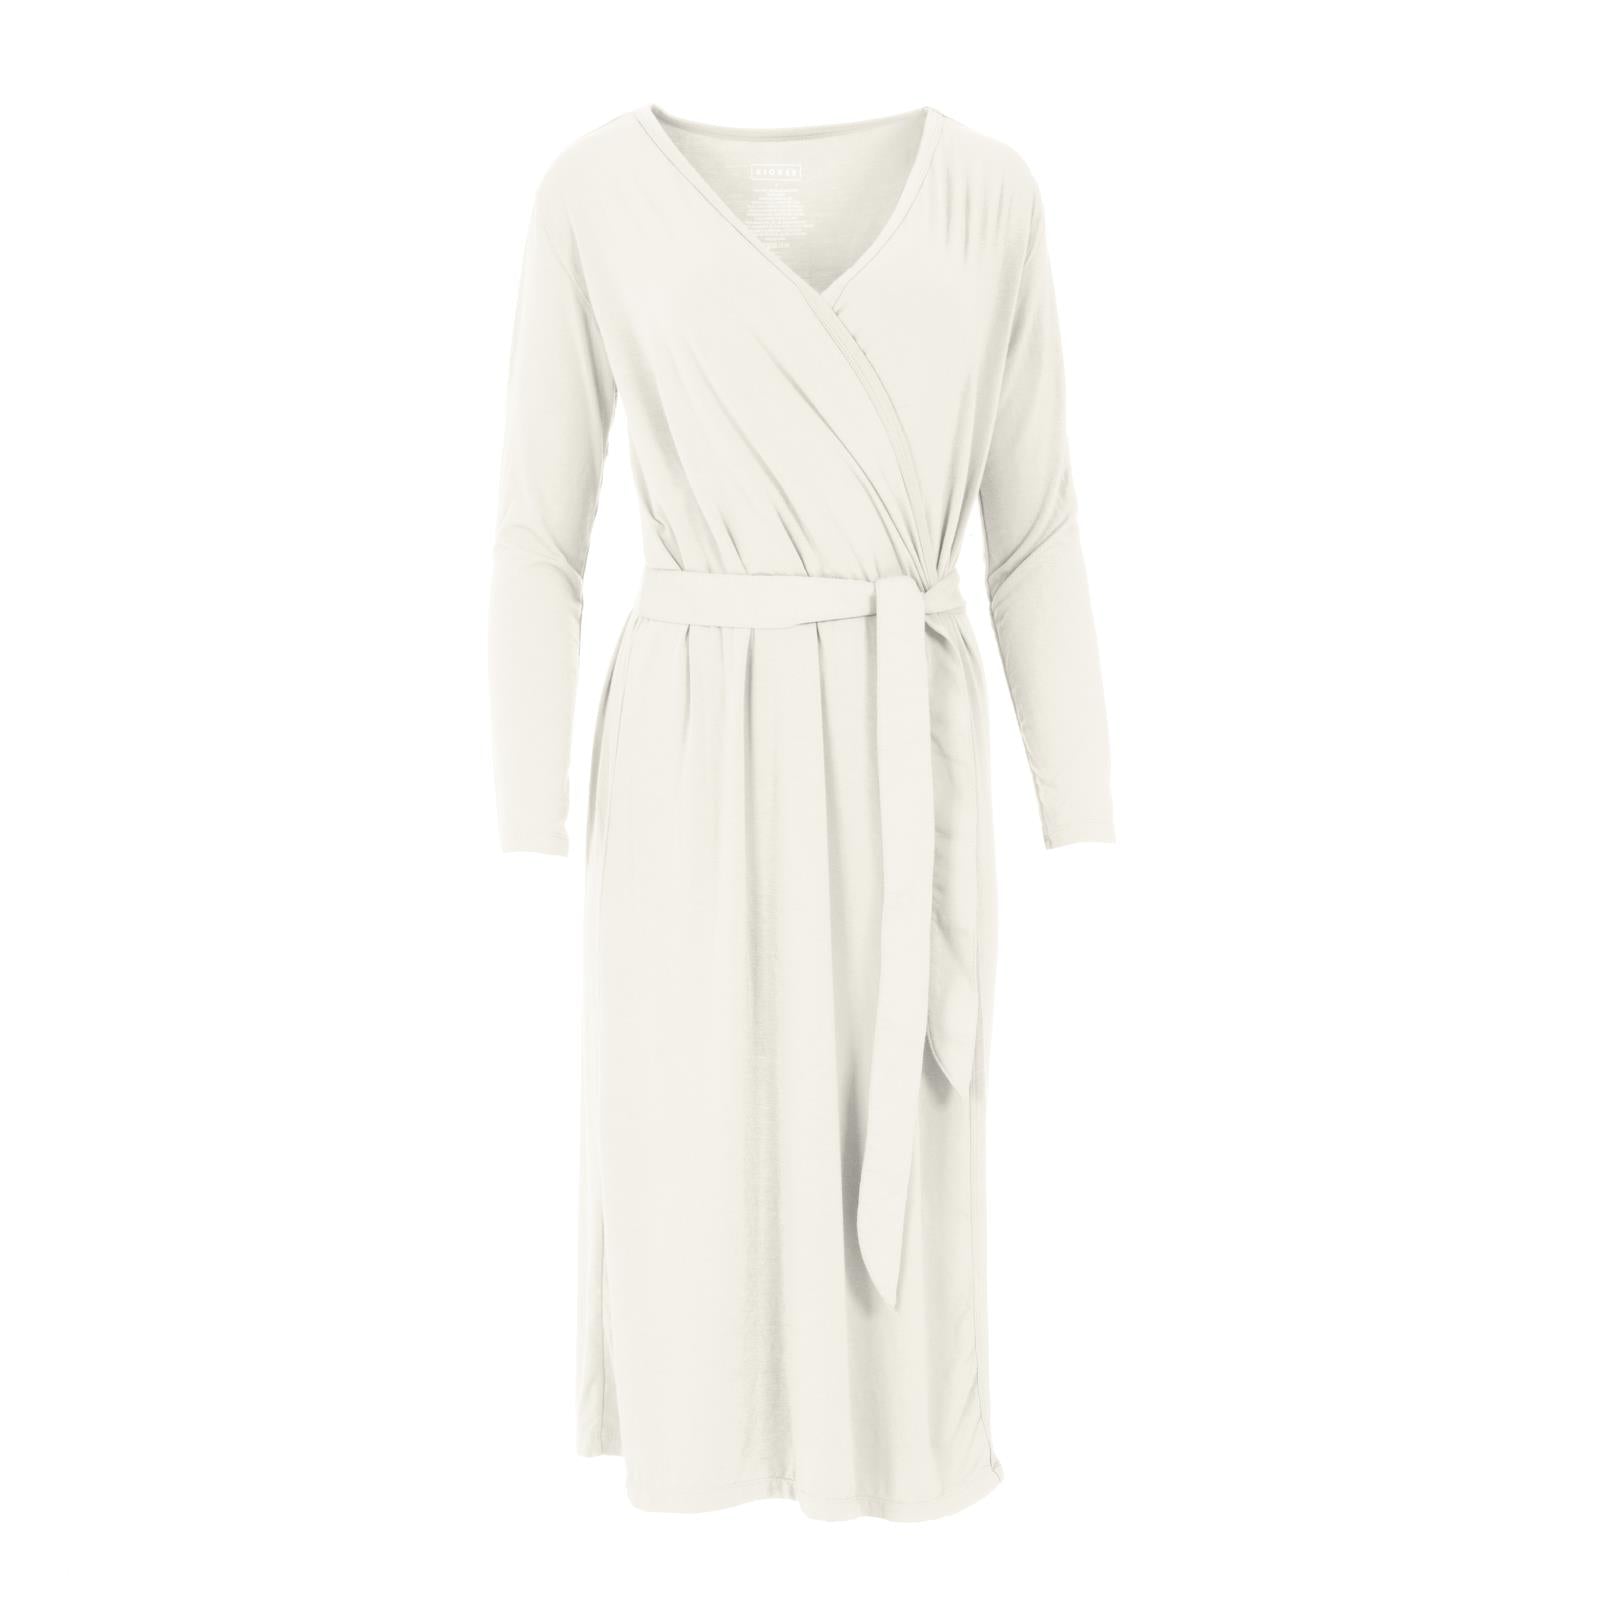 Which women's robe is most comfortable? – Free Birdees